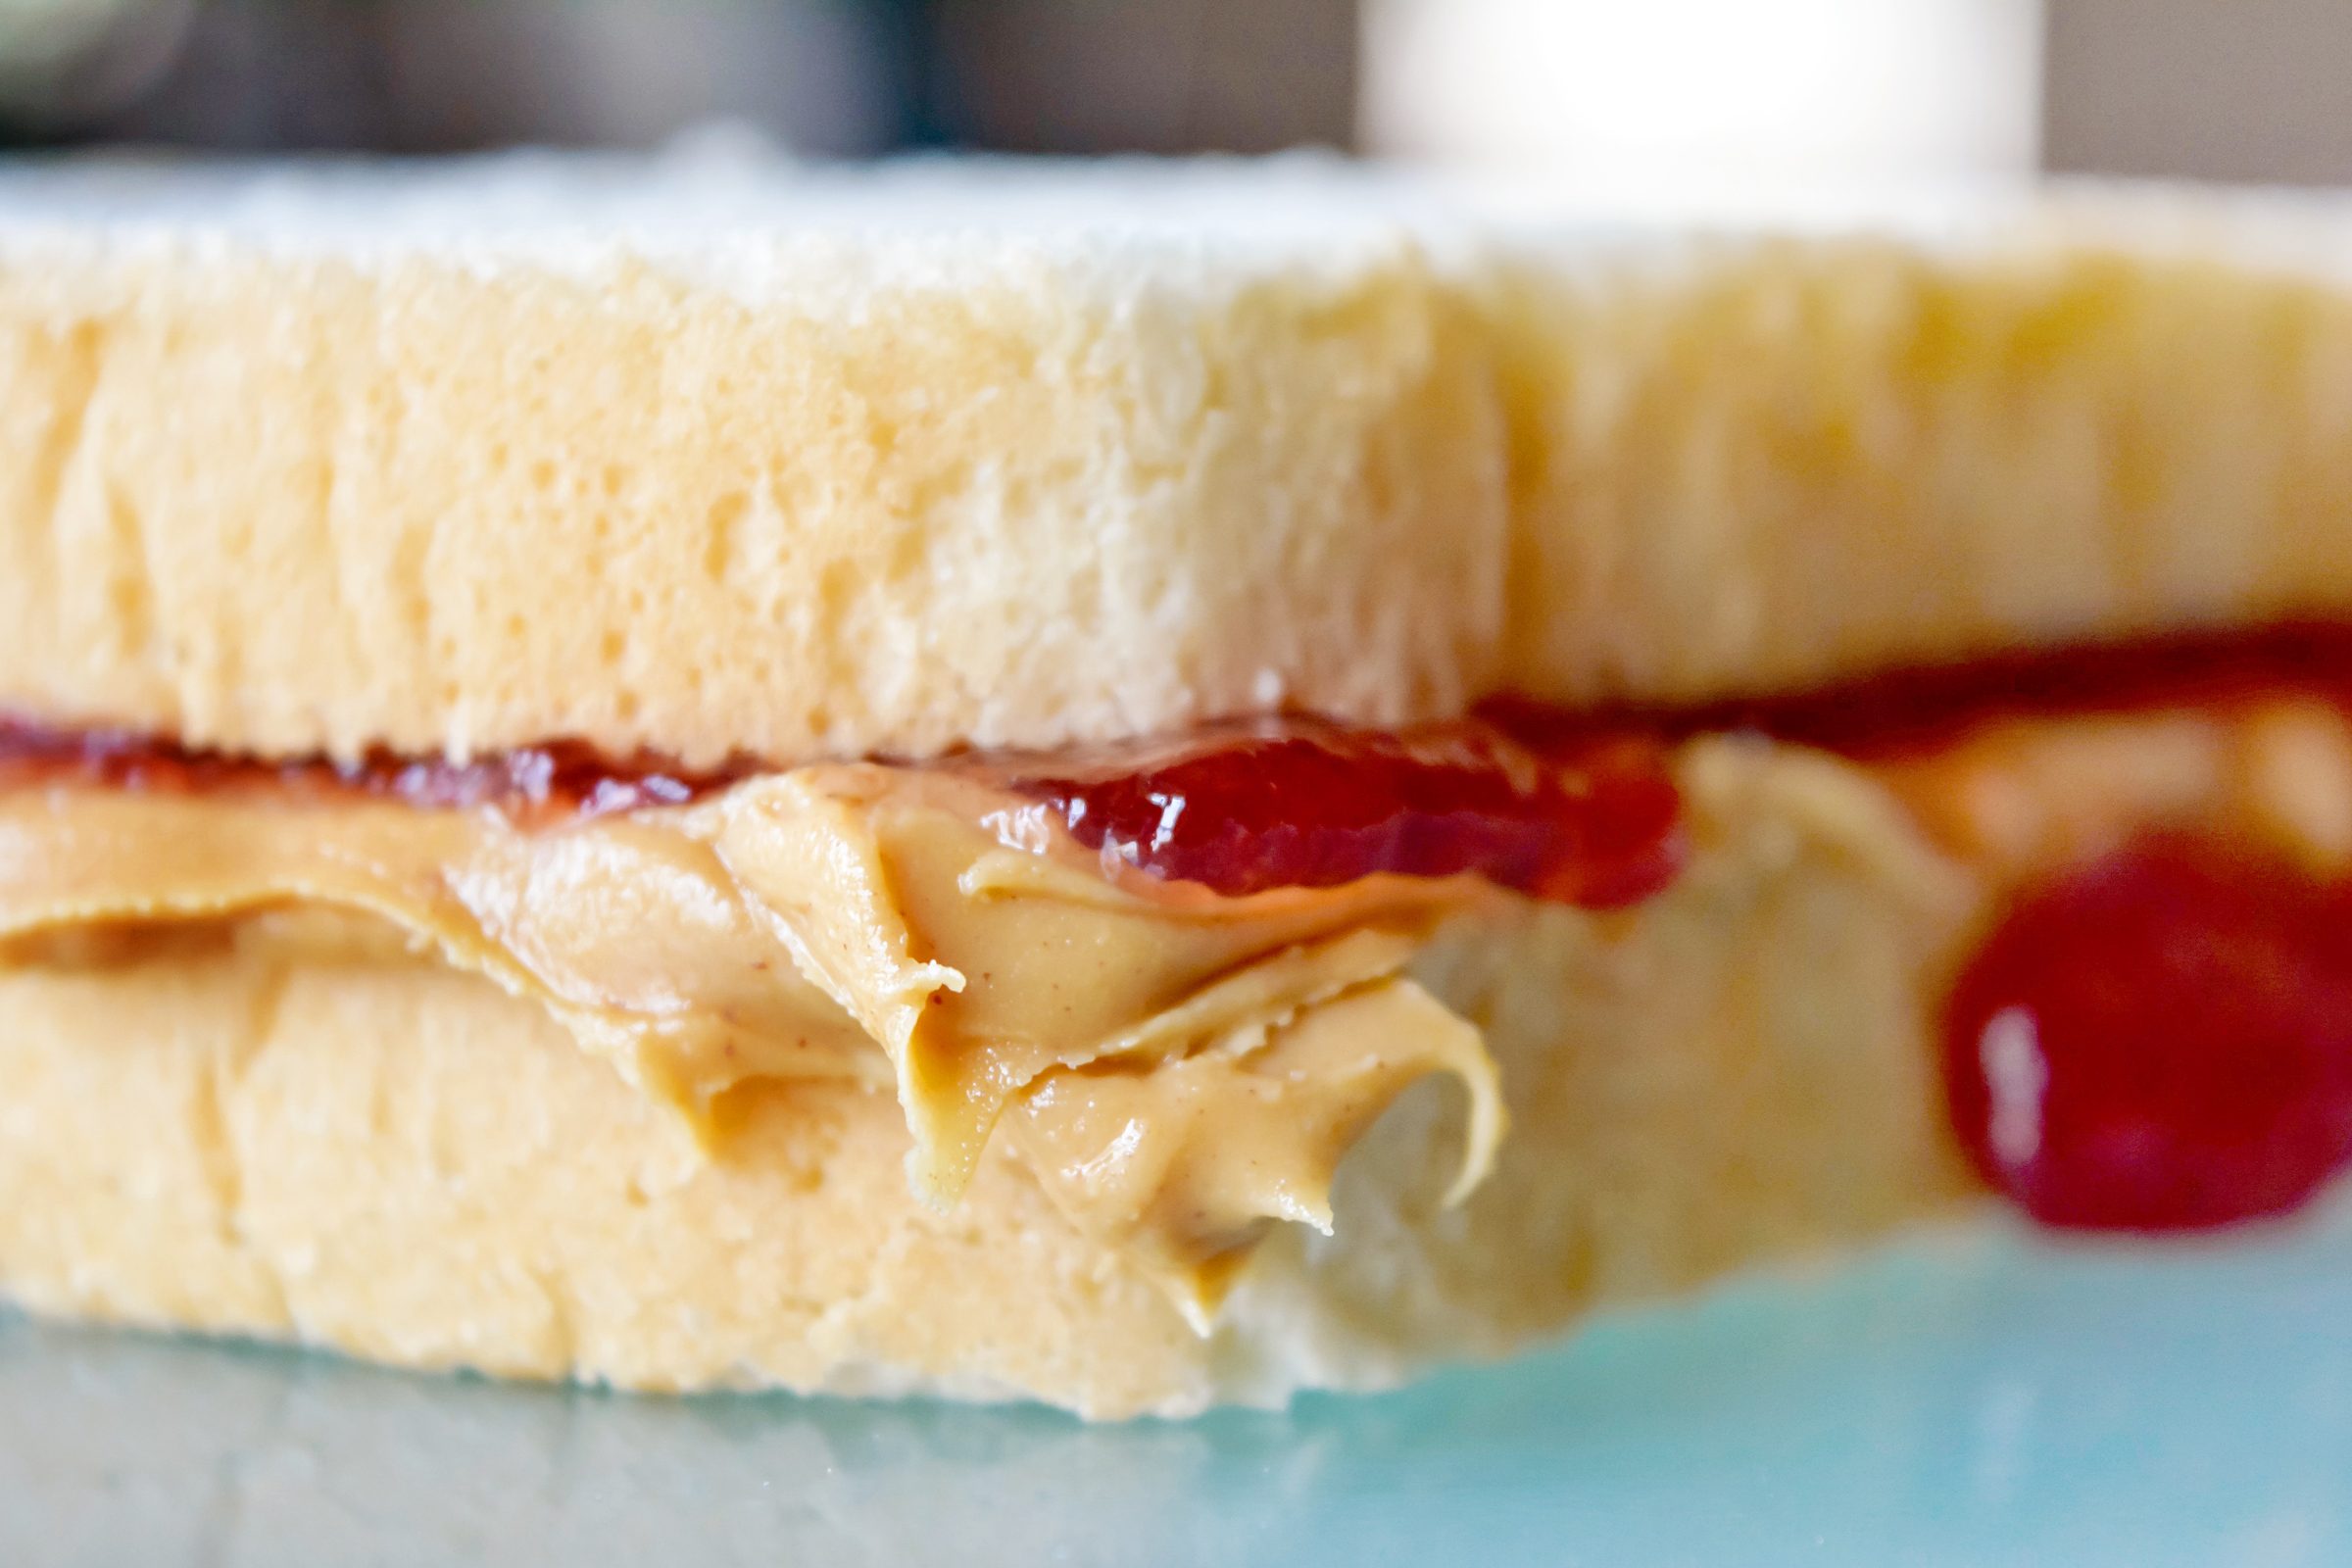 peanut butter and jelly sandwich close up